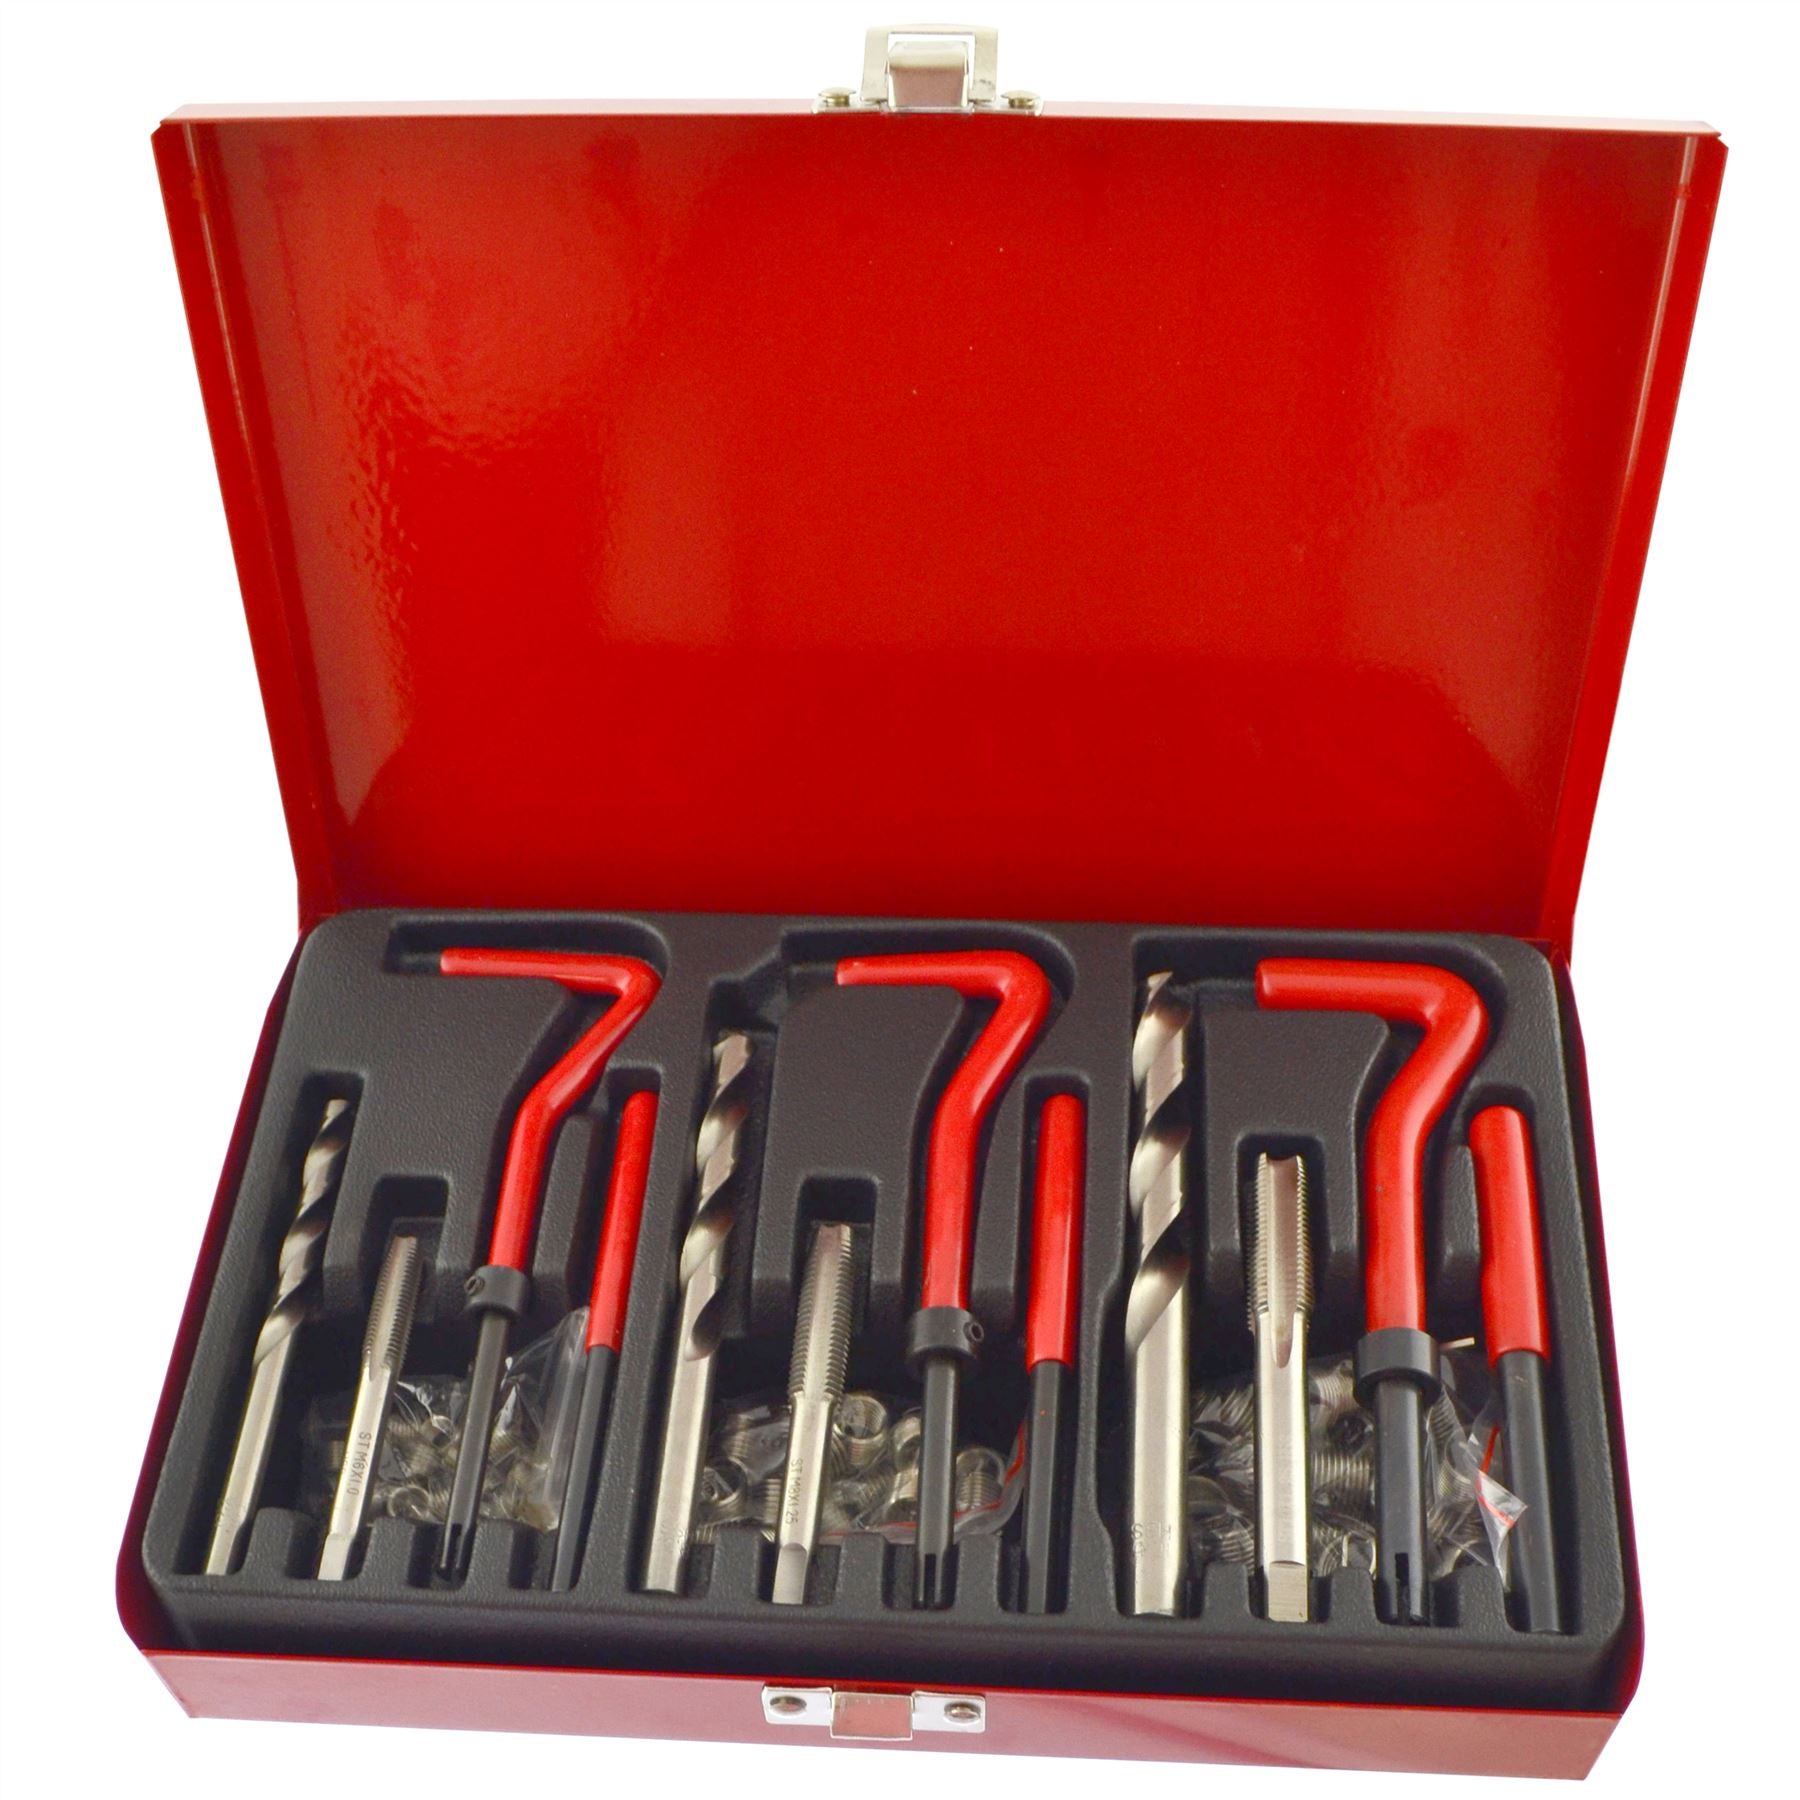 Thread installation and repair kit helicoil set 88pc metric sizes M6-M10 AN047